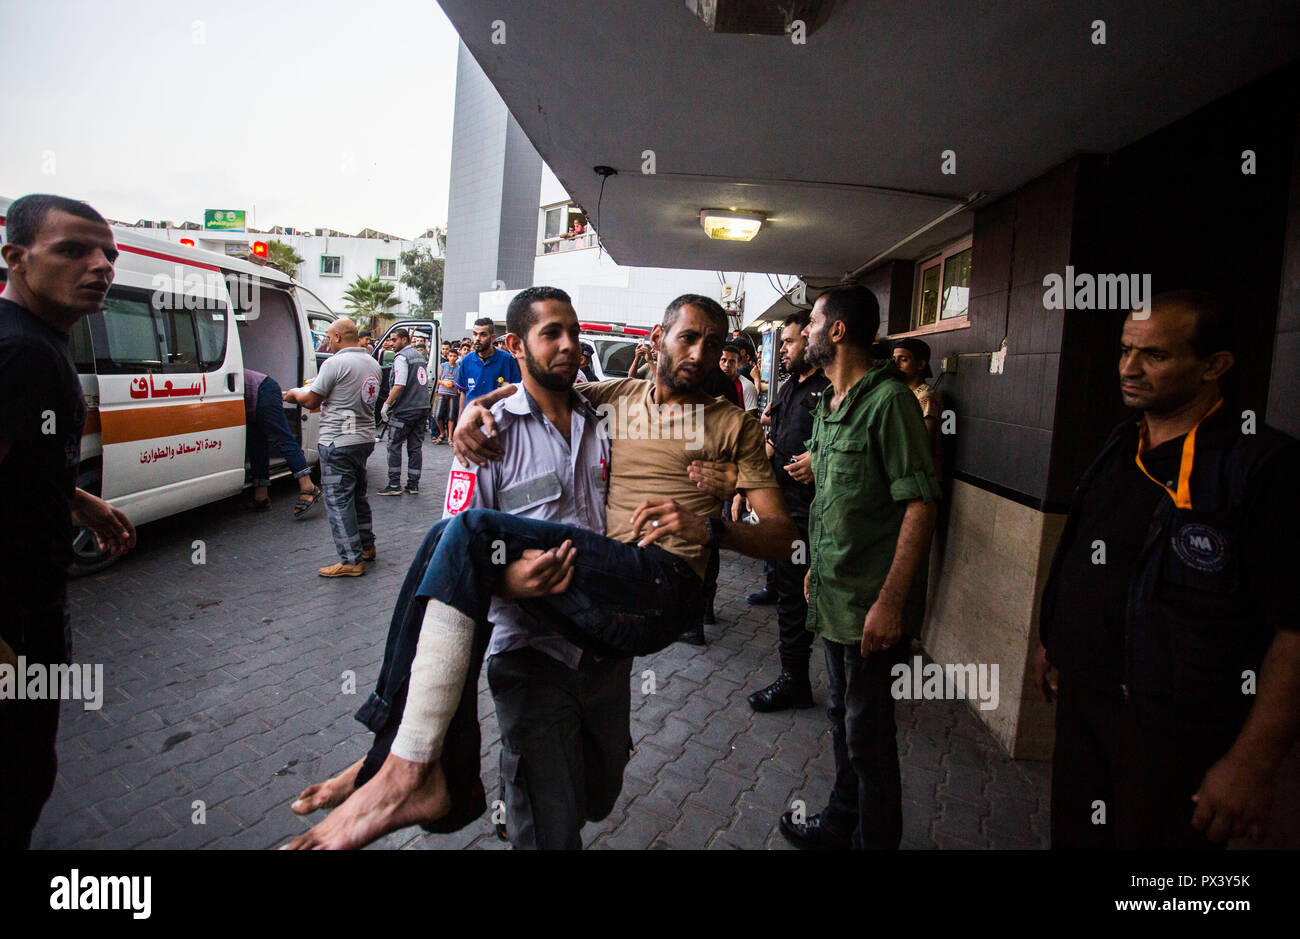 An injured demonstrator is seen being brought to Shifa hospital to receive treatment during the clashes. Clashes at the Israel border in an anti-occupation march near the eastern border in Gaza Strip. Stock Photo